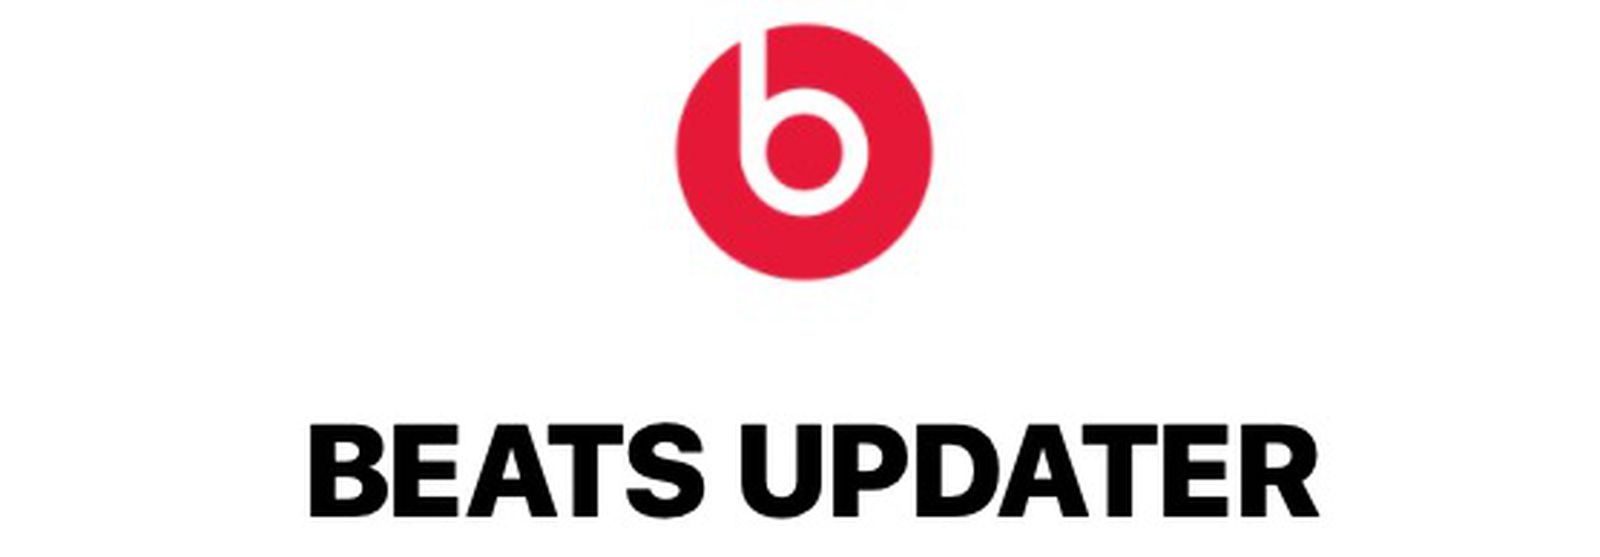 beats updater with mac 10.11